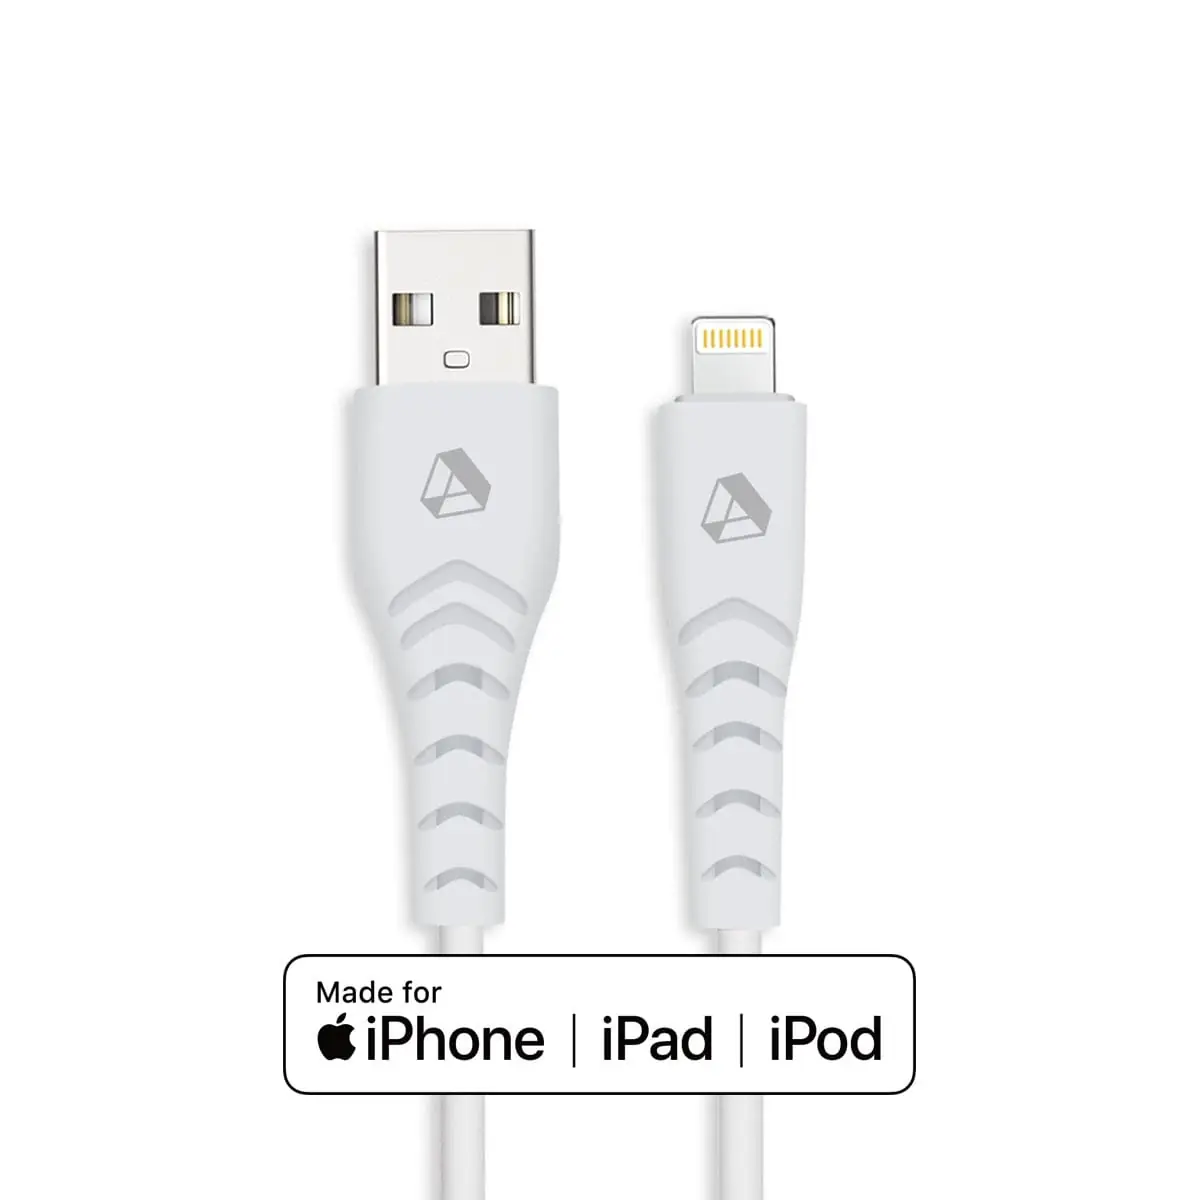 Eco-friendly Lightning to USB-A Cable - 1.5m: A Sustainable Solution for Charging Your Devices